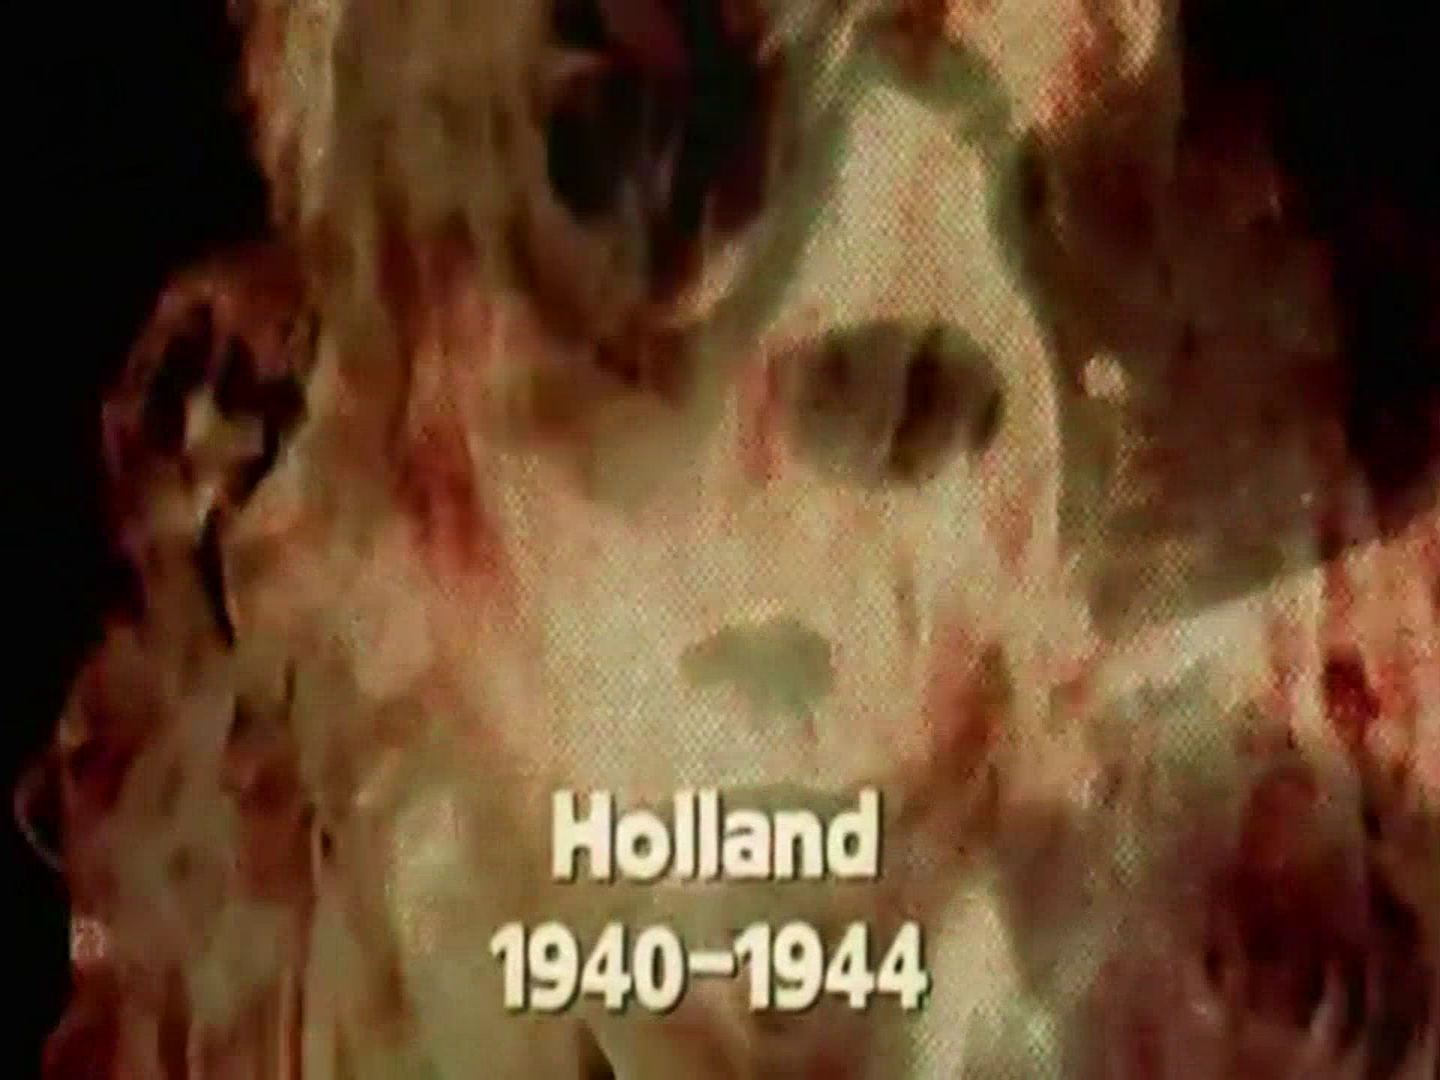 Main title from the 1974 ‘Occupation’ episode of The World at War (1973-74) (2). Holland 1940-1944